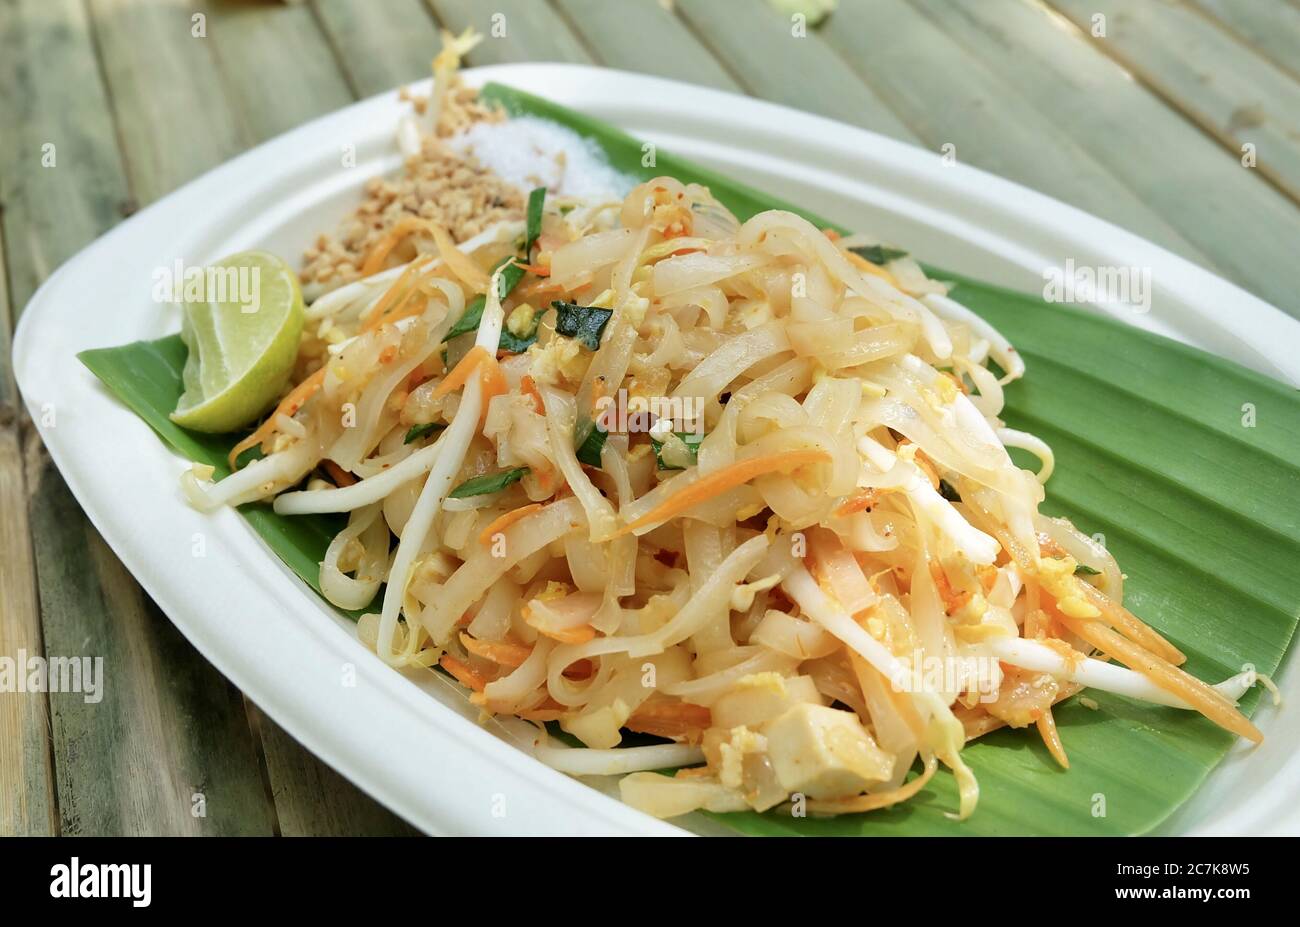 Thai Cuisine, Pad Thai or Thai Stir Fried Noodles and Dried Shrimps Served with Roasted Ground Peanuts, Lime and Sugar. One of The Most Popular Dish i Stock Photo